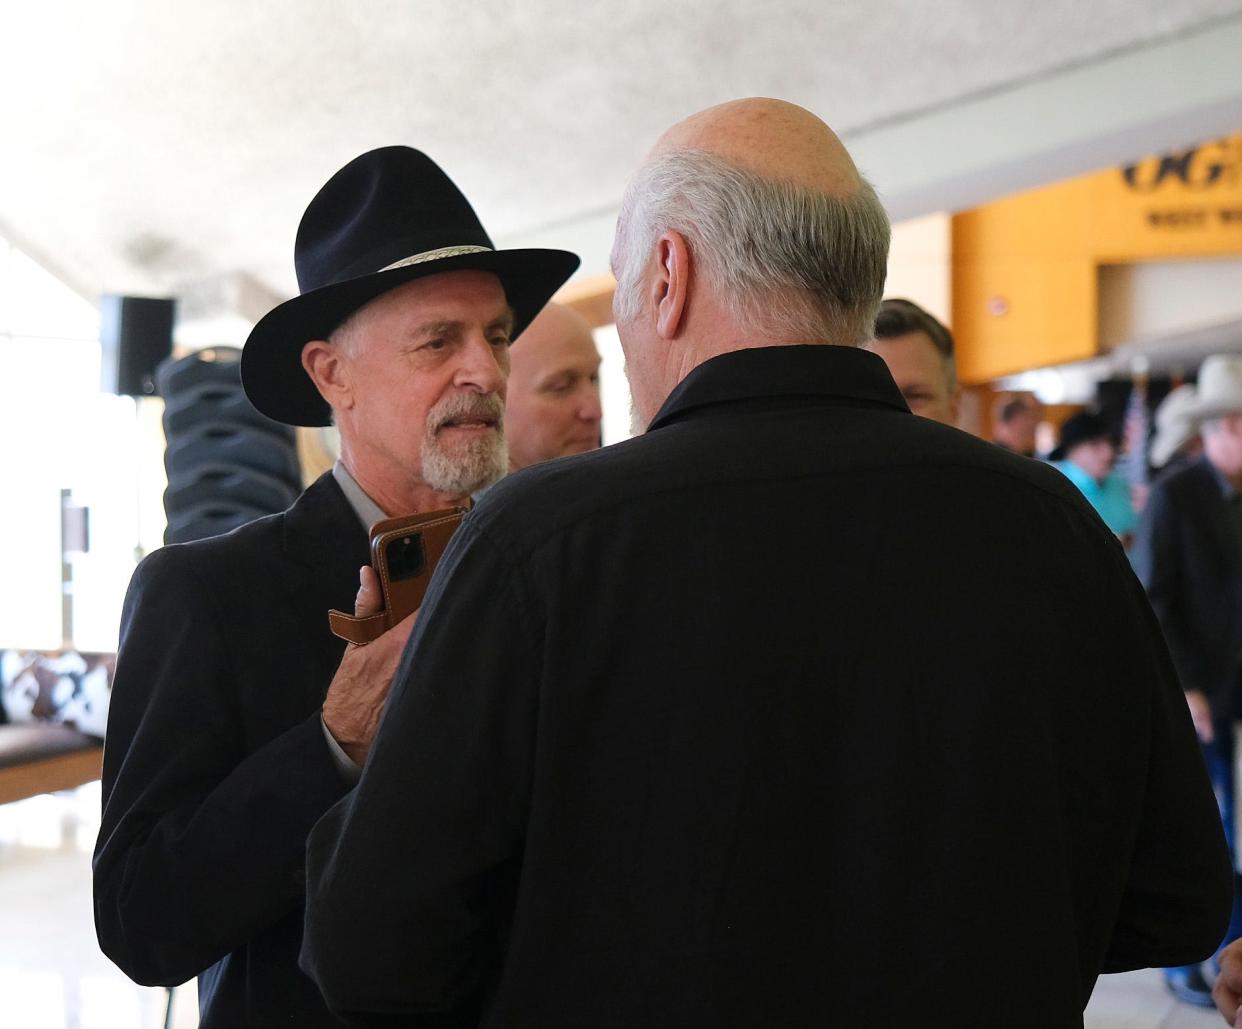 Keith Carradine, left, talks with Rex Linn after a panel discussion ahead of the Western Heritage Awards April 13, 2024, at the National Cowboy & Western Heritage Museum in Oklahoma City.